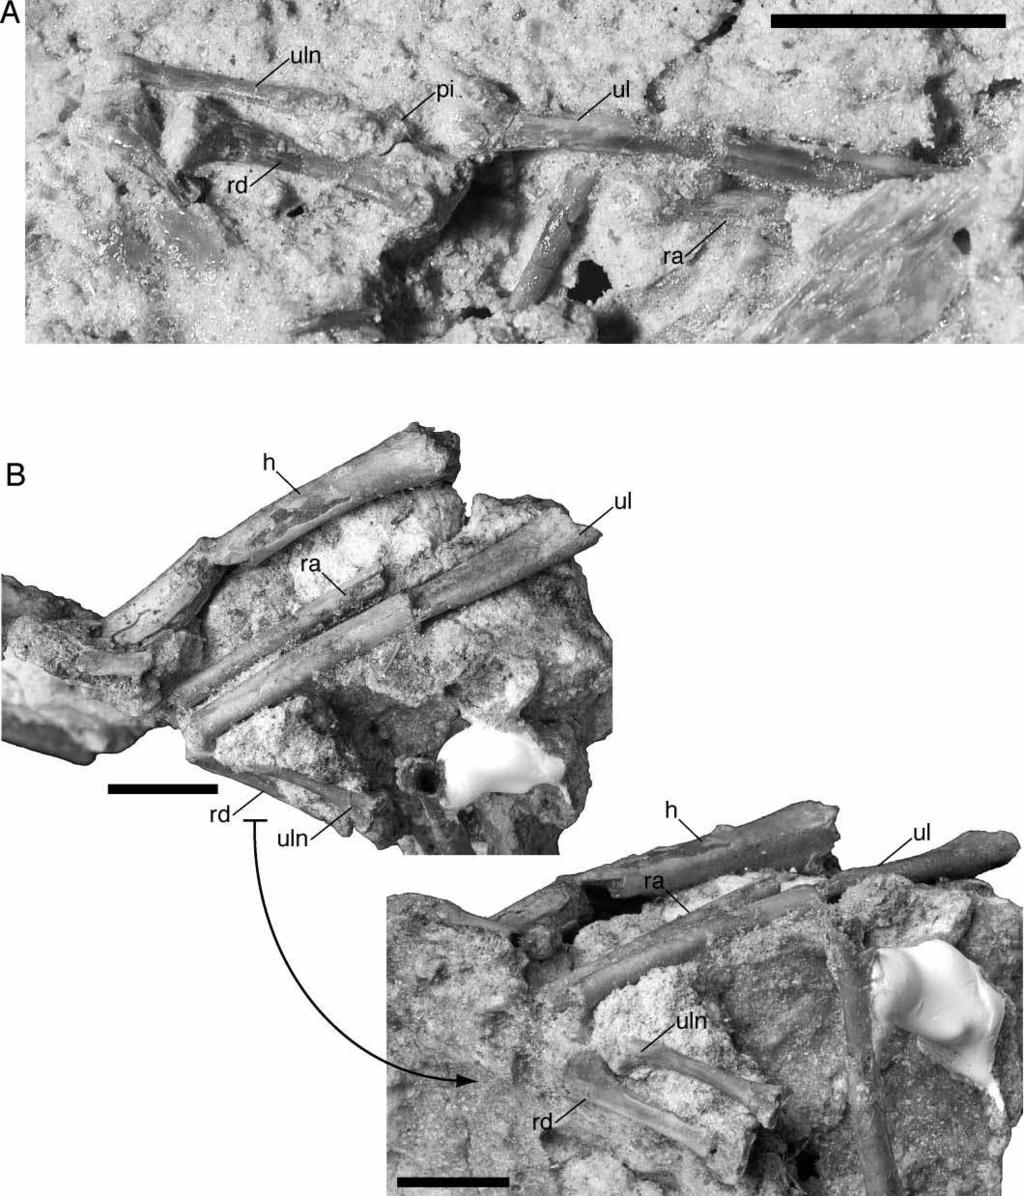 New Araripesuchus from Madagascar 321 Figure 73. Forearm morphology. A, Partially obscured left radius, ulna, ulnare, radiale and pisiform (FMNH PR 2324). B, Nearly complete right forearm.